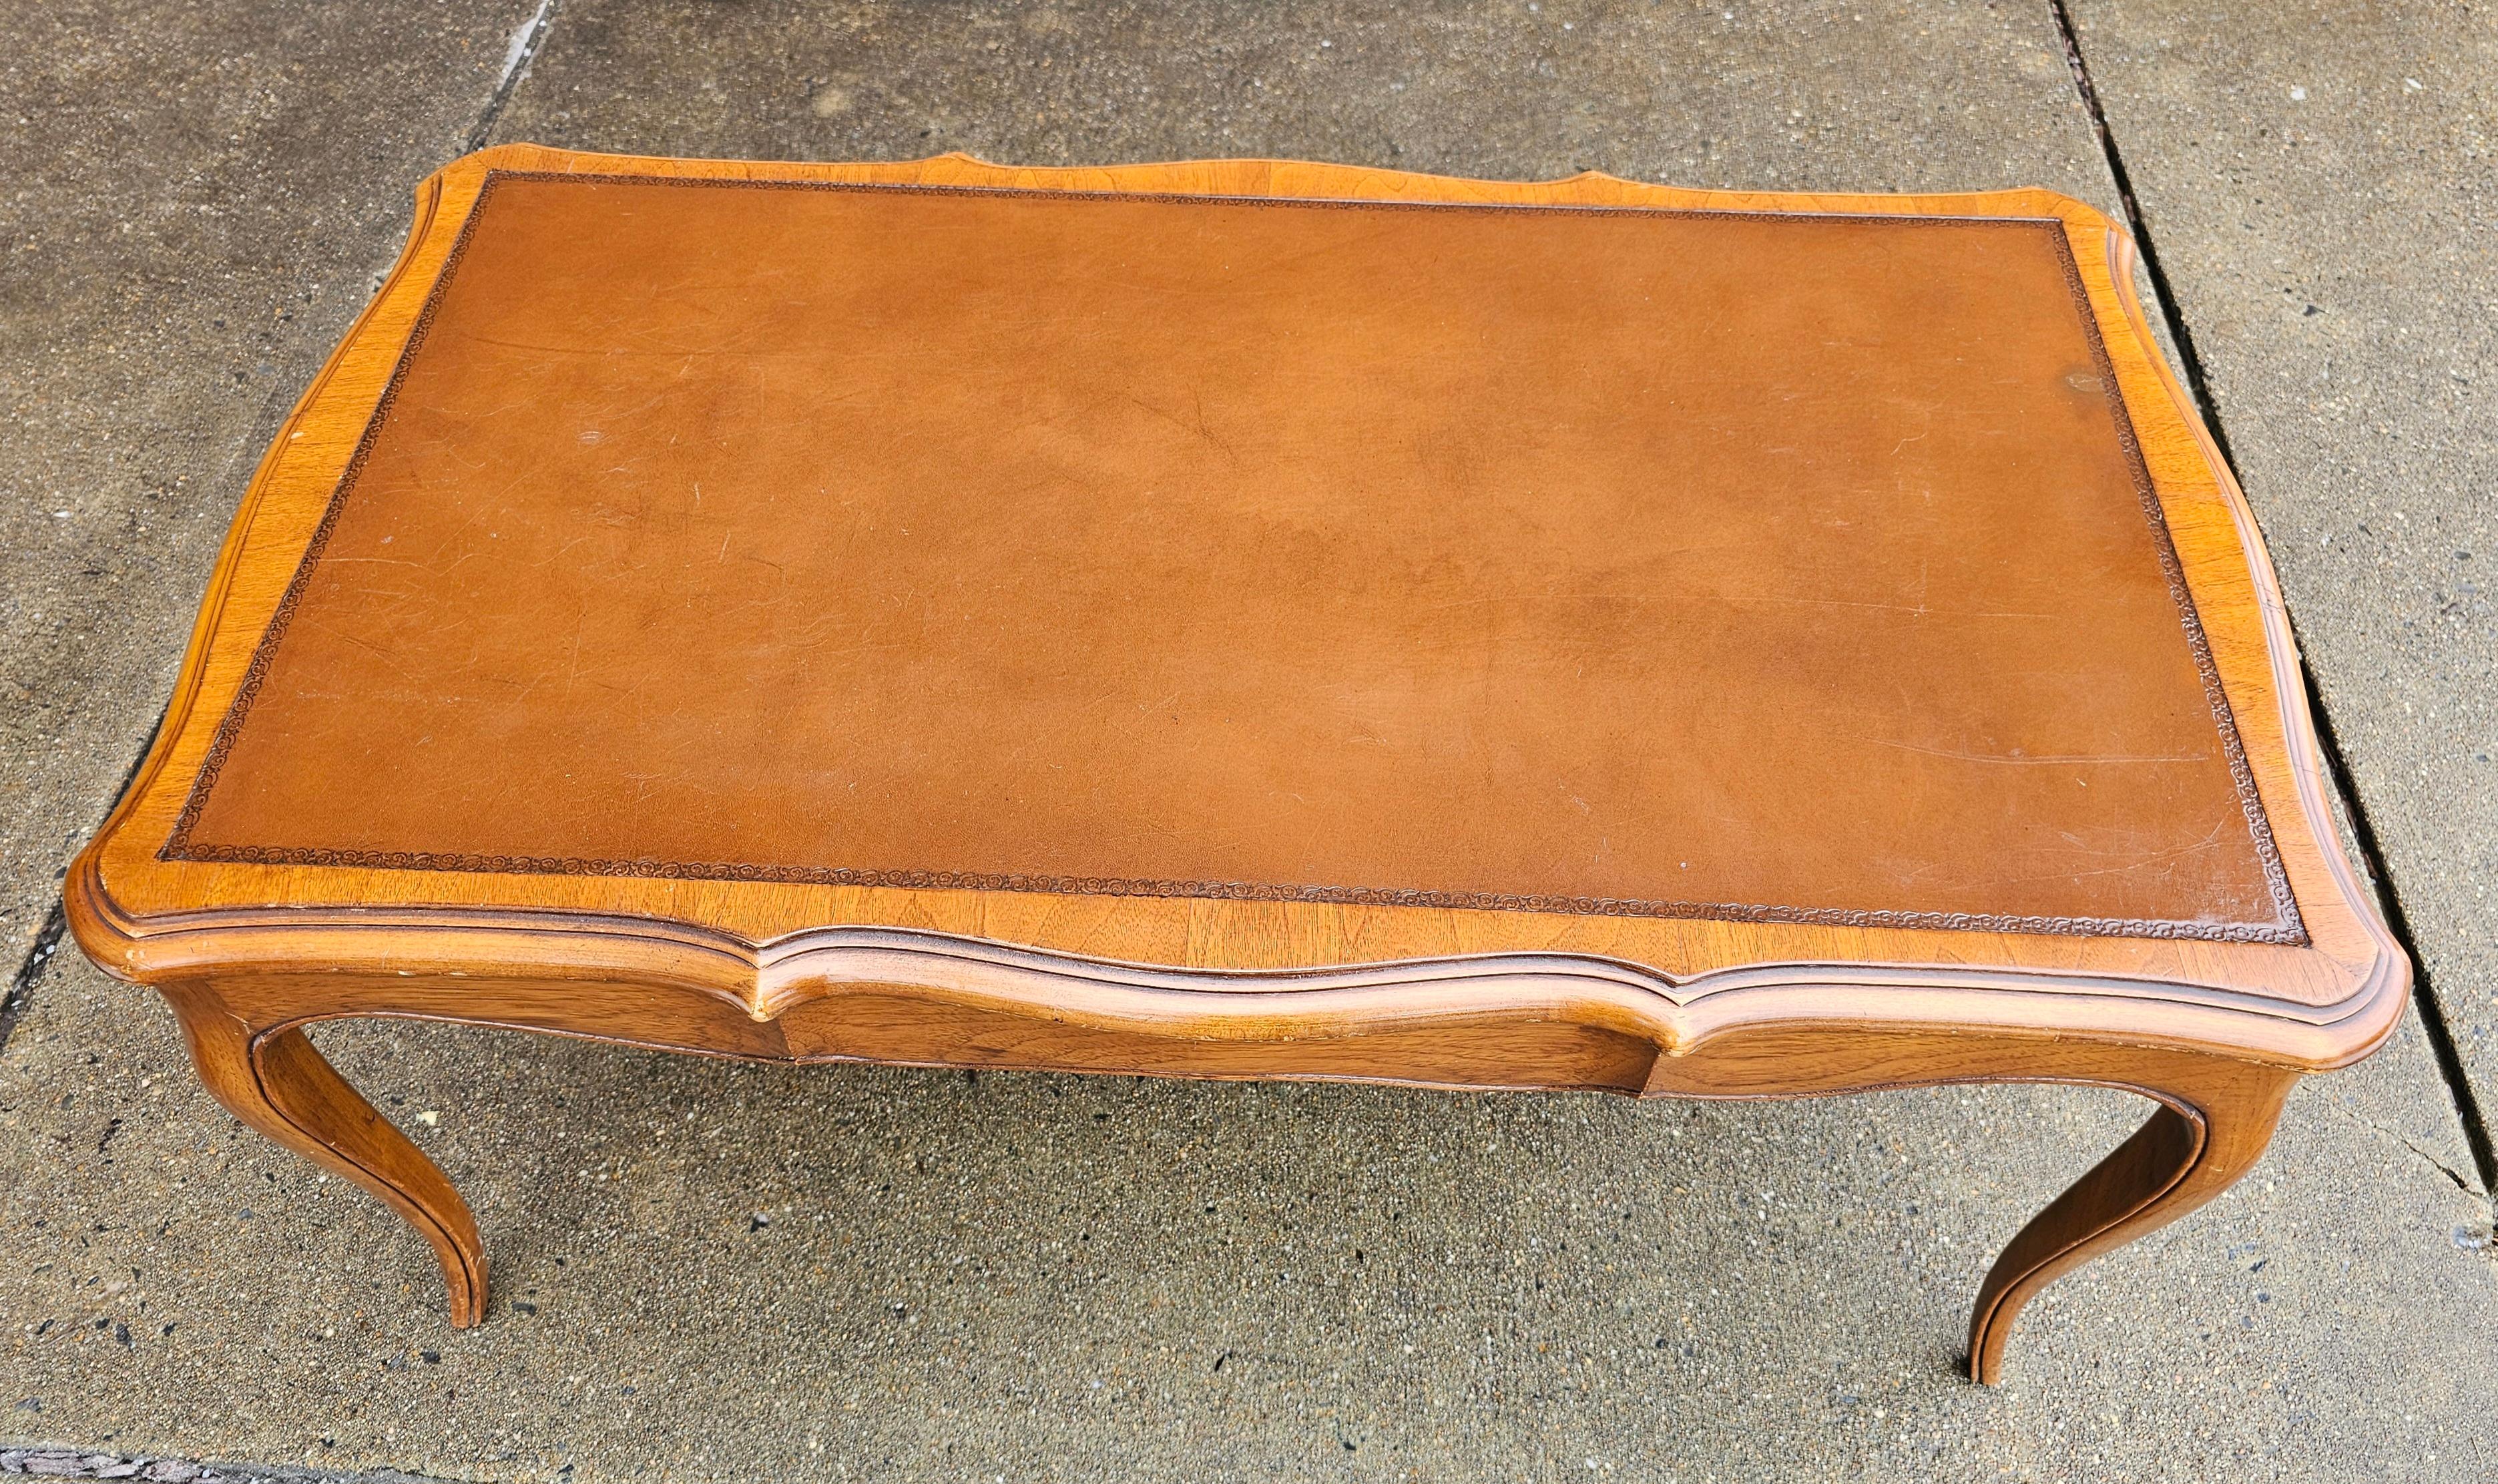 W & J Sloane Louis XV Style Tooled Leather Inset Top Walnut Coffee Table In Good Condition For Sale In Germantown, MD